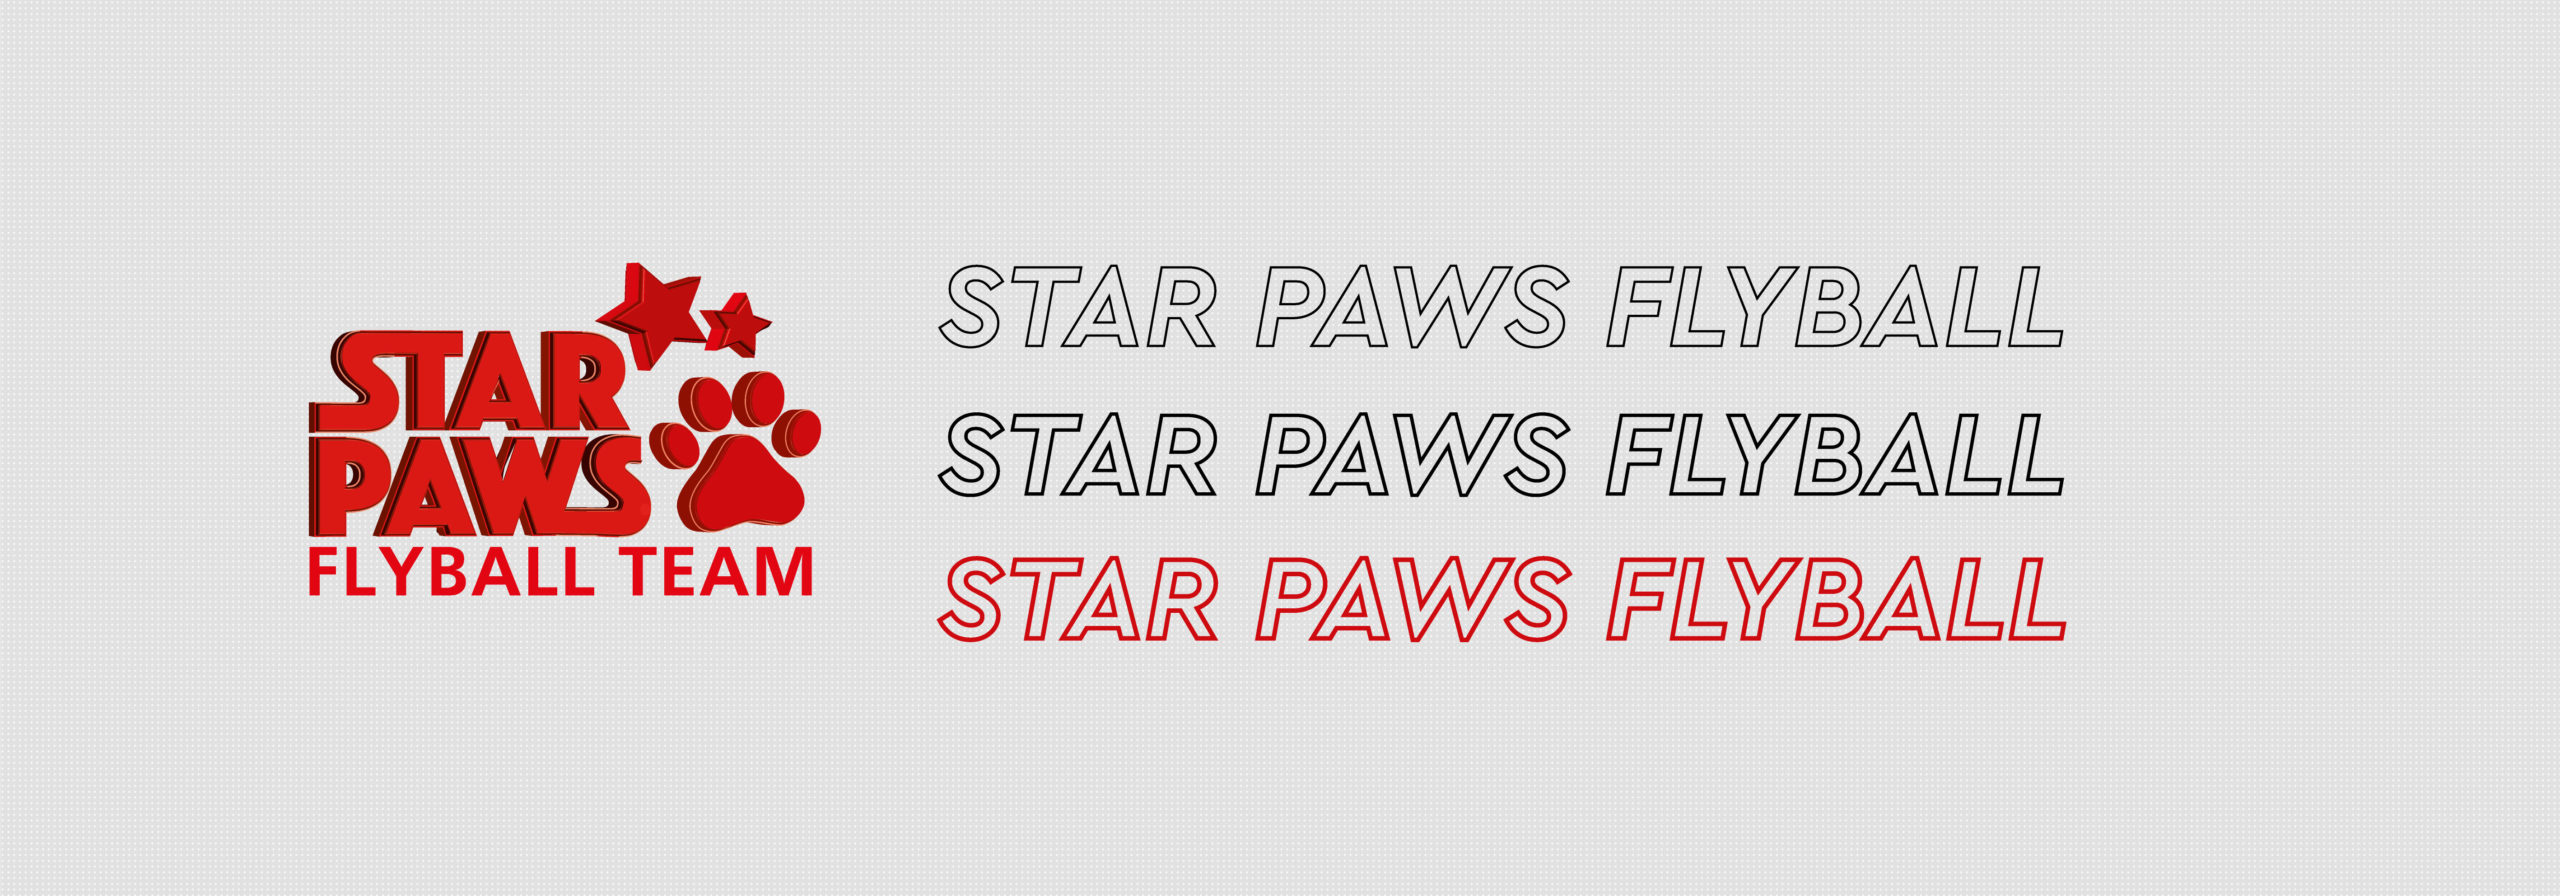 Star Paws Flyball Team